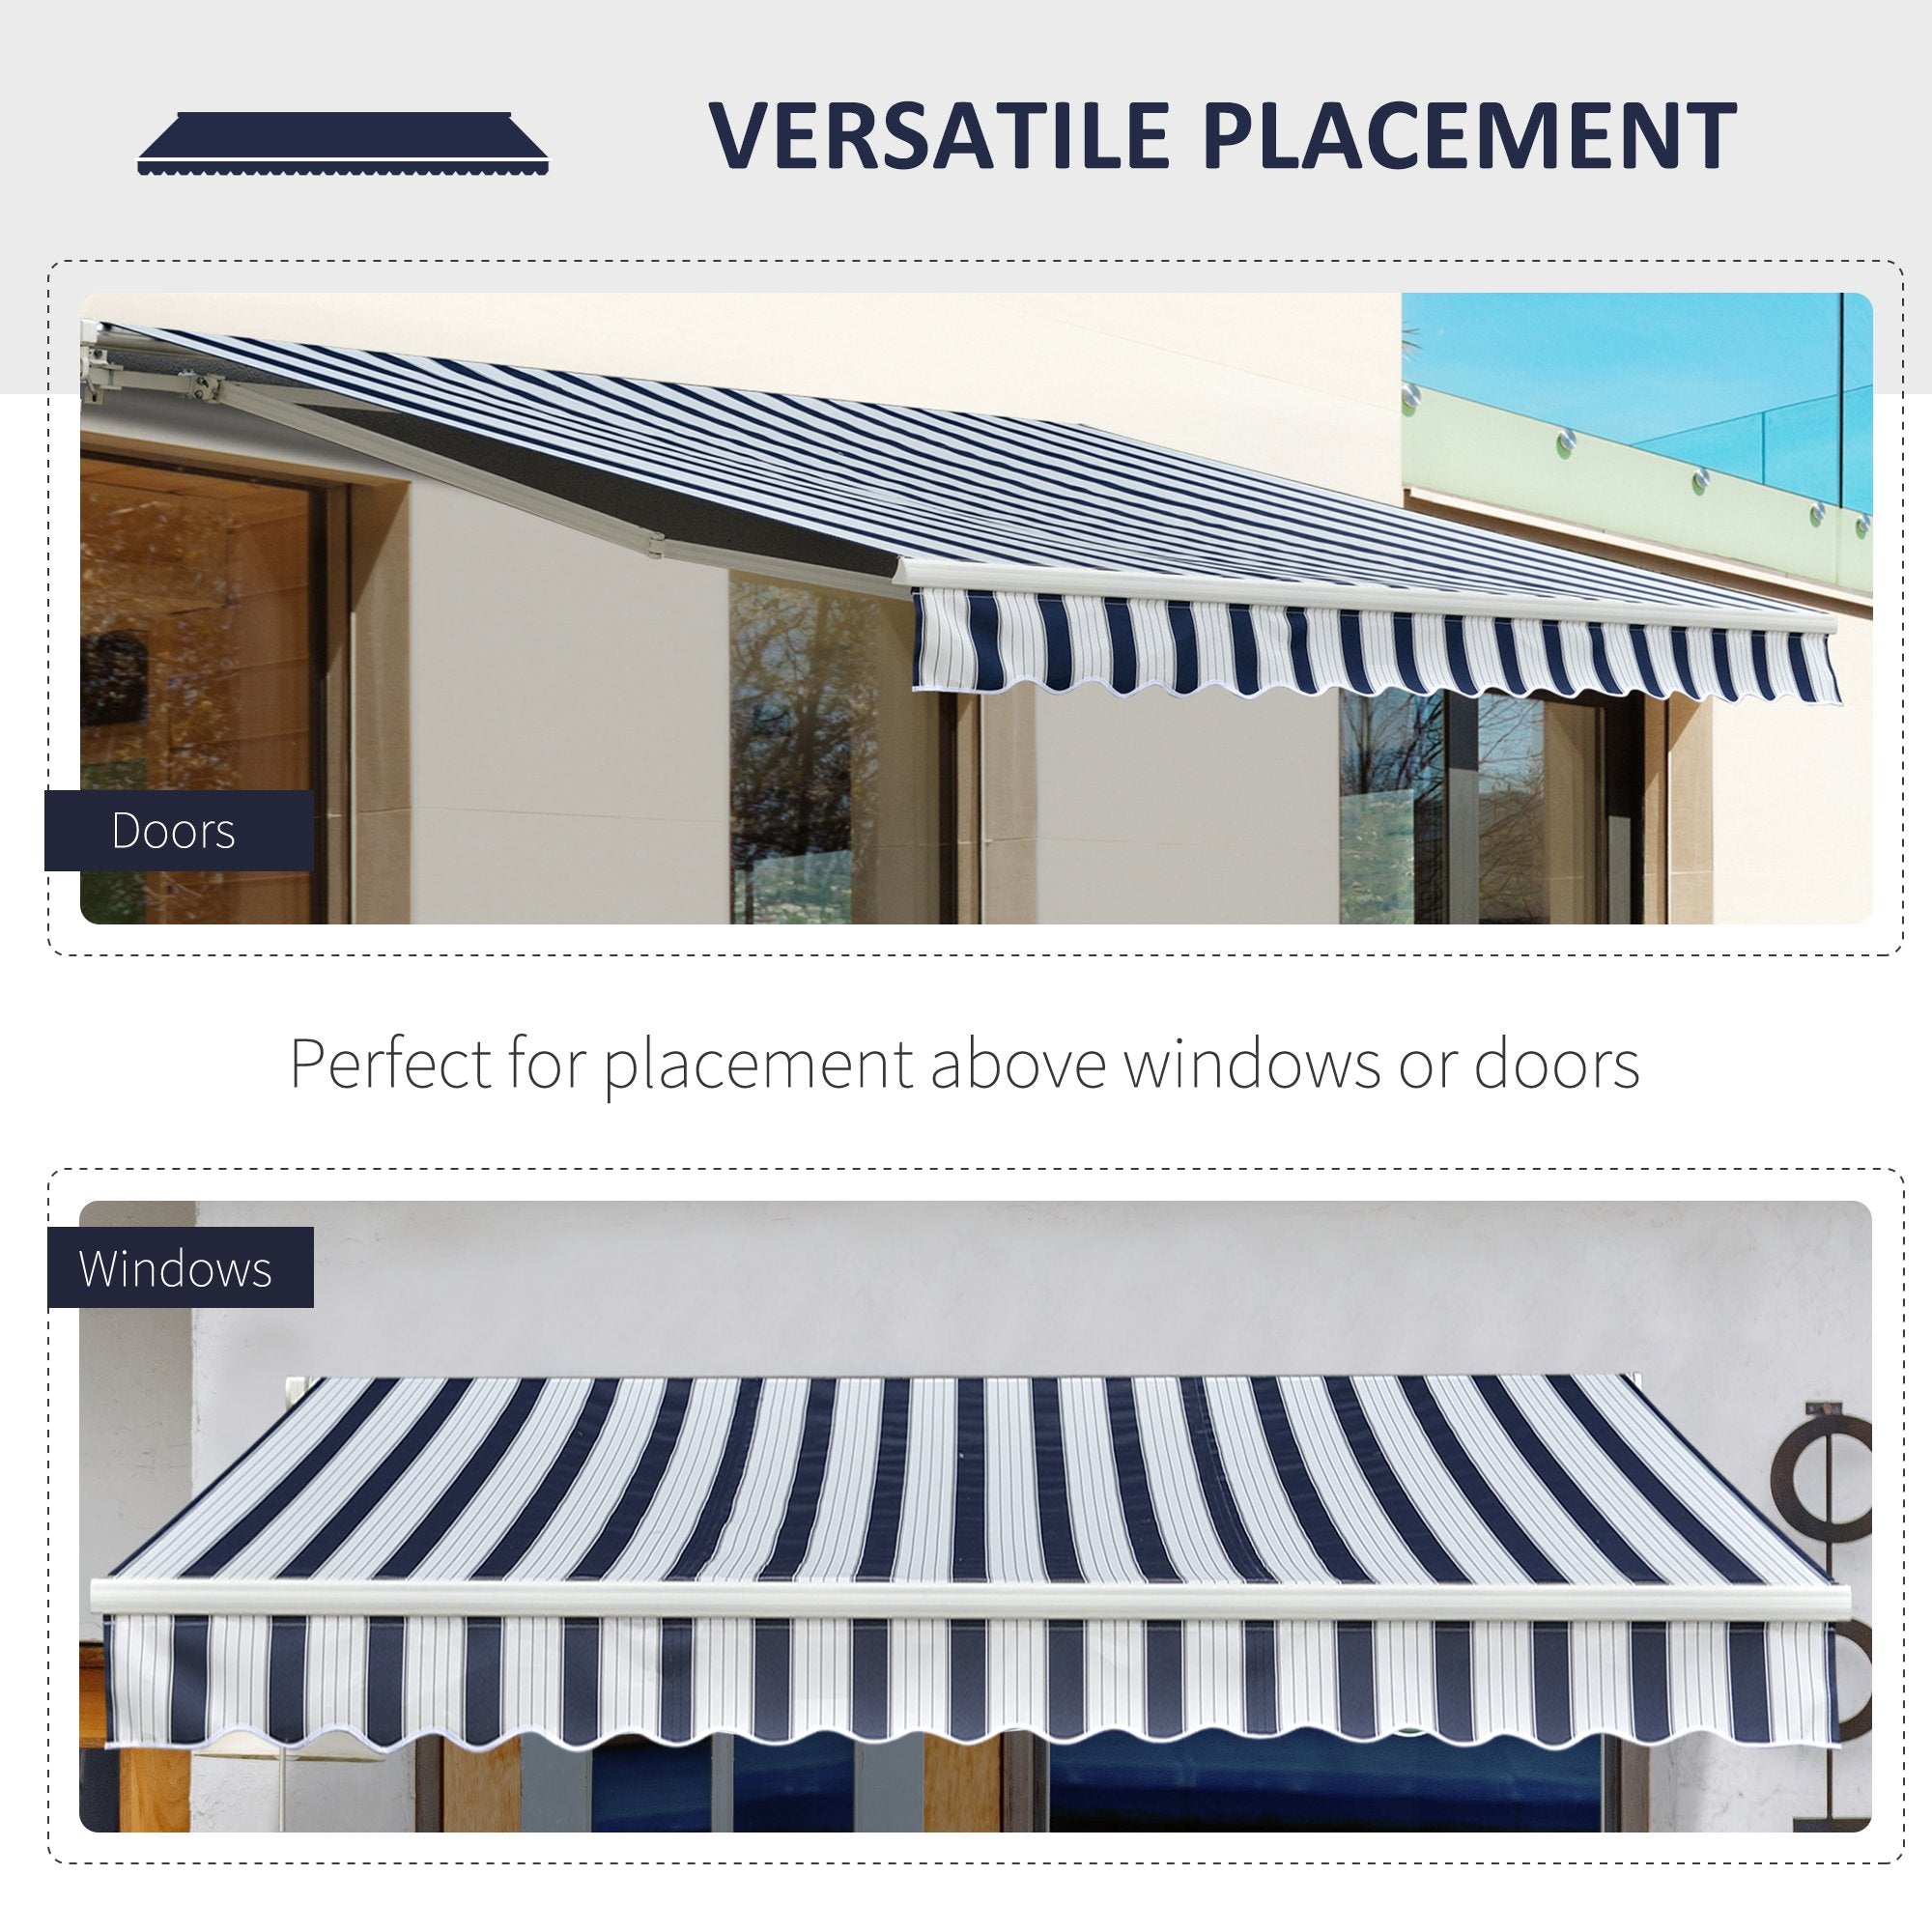 Outsunny Garden Patio Manual Retractable Awning Canopy Sun Shade Shelter, 3m x 2.5m-Blue/White - Inspirely